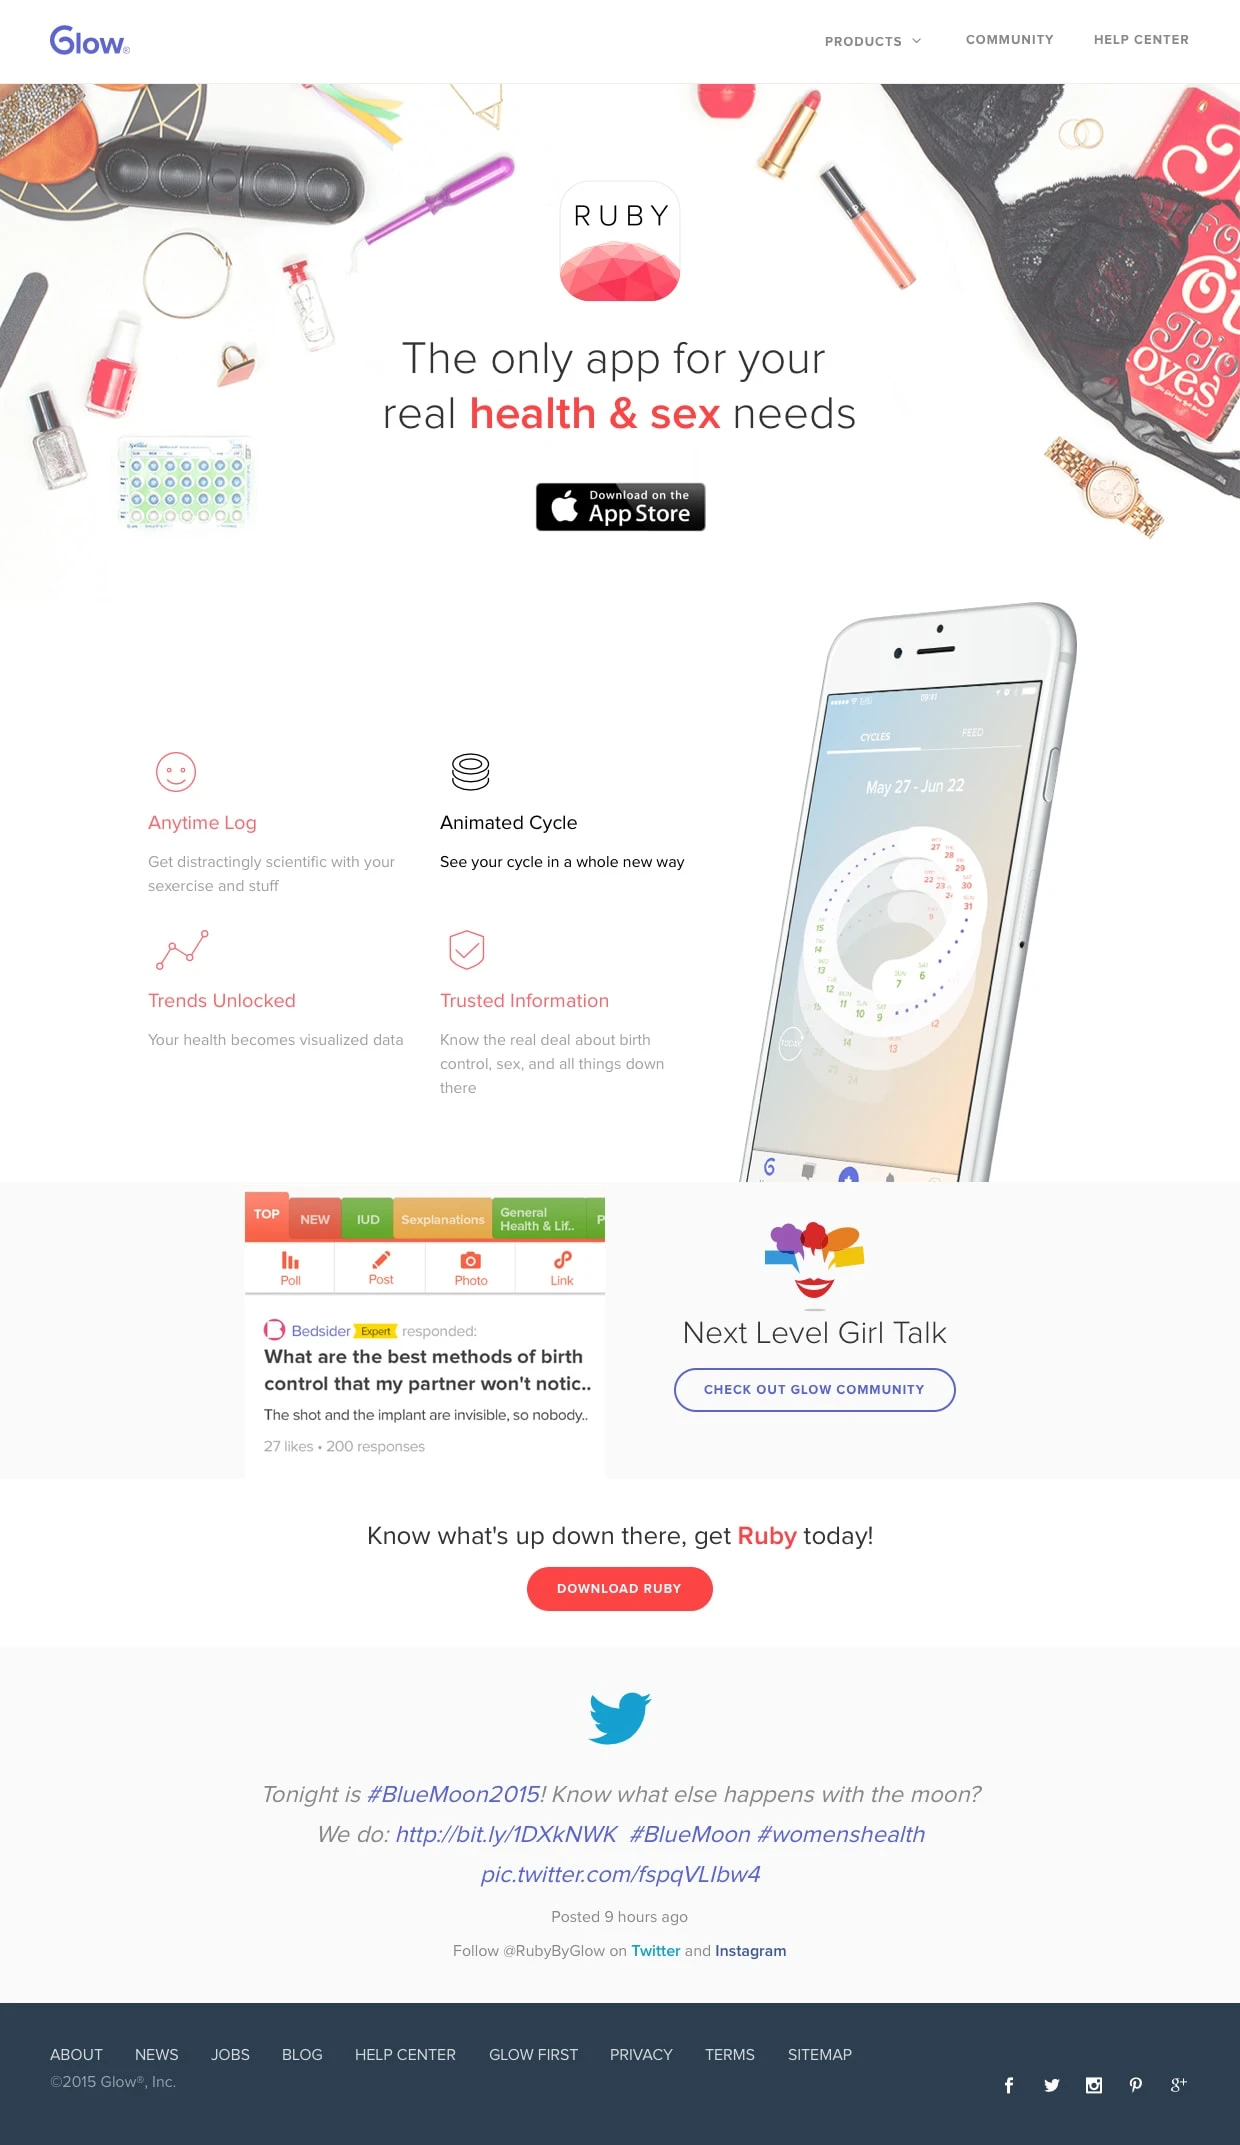 Glow Landing Page Example: Eve by Glow is a savvy health & sex app for women who want to take control of their sex lives. Eve helps women figure out tackle many different dimensions of their health: birth control & contraception, ovulation & fertility, menstruation, cycle symptoms and trends.